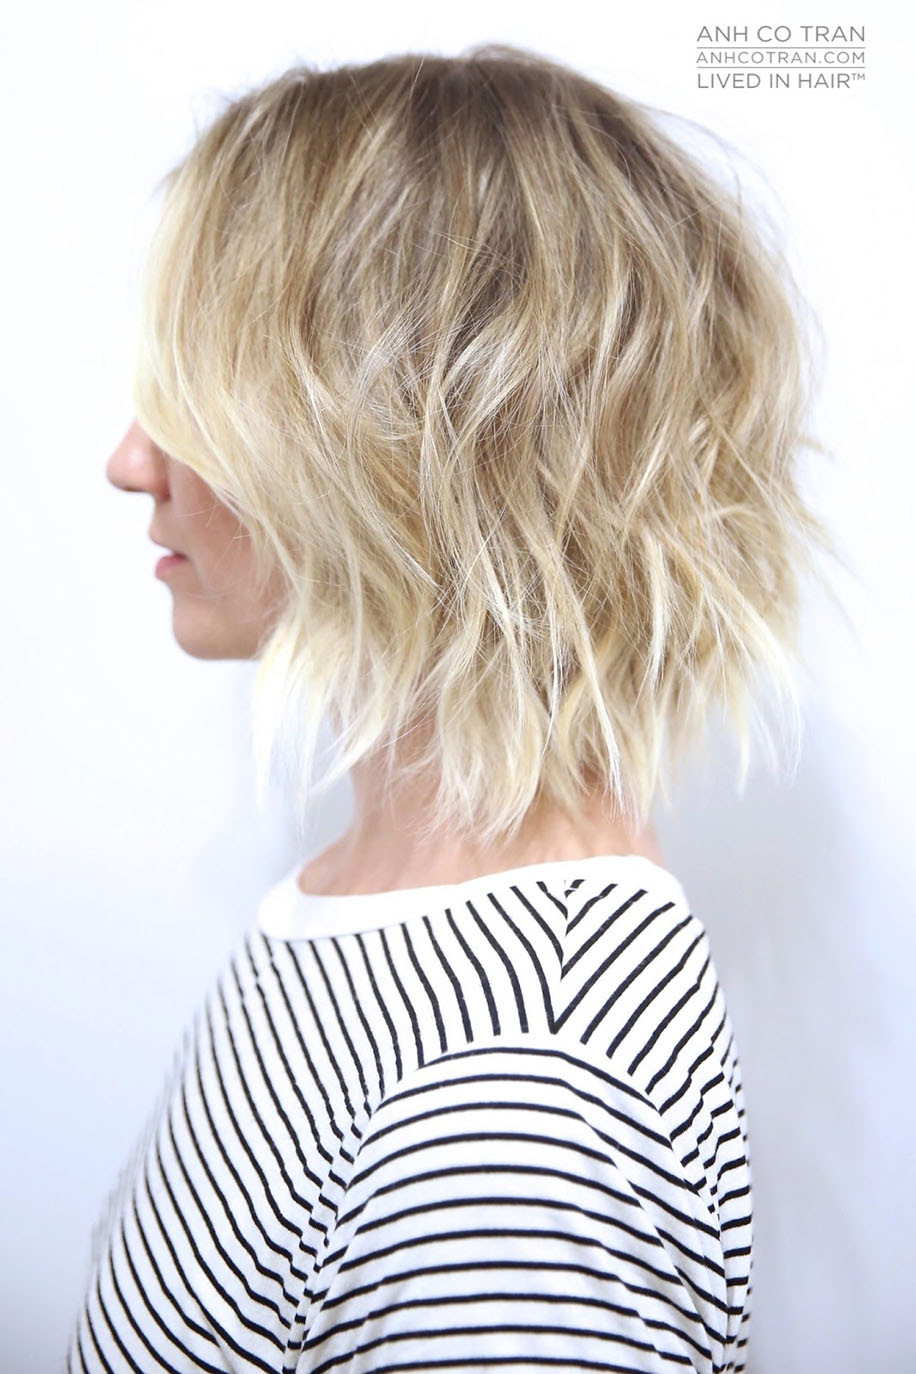 Cute Hairstyles To Do With Short Hair
 Cute Short Hairstyles to Step Up Your Hair Game Big Time